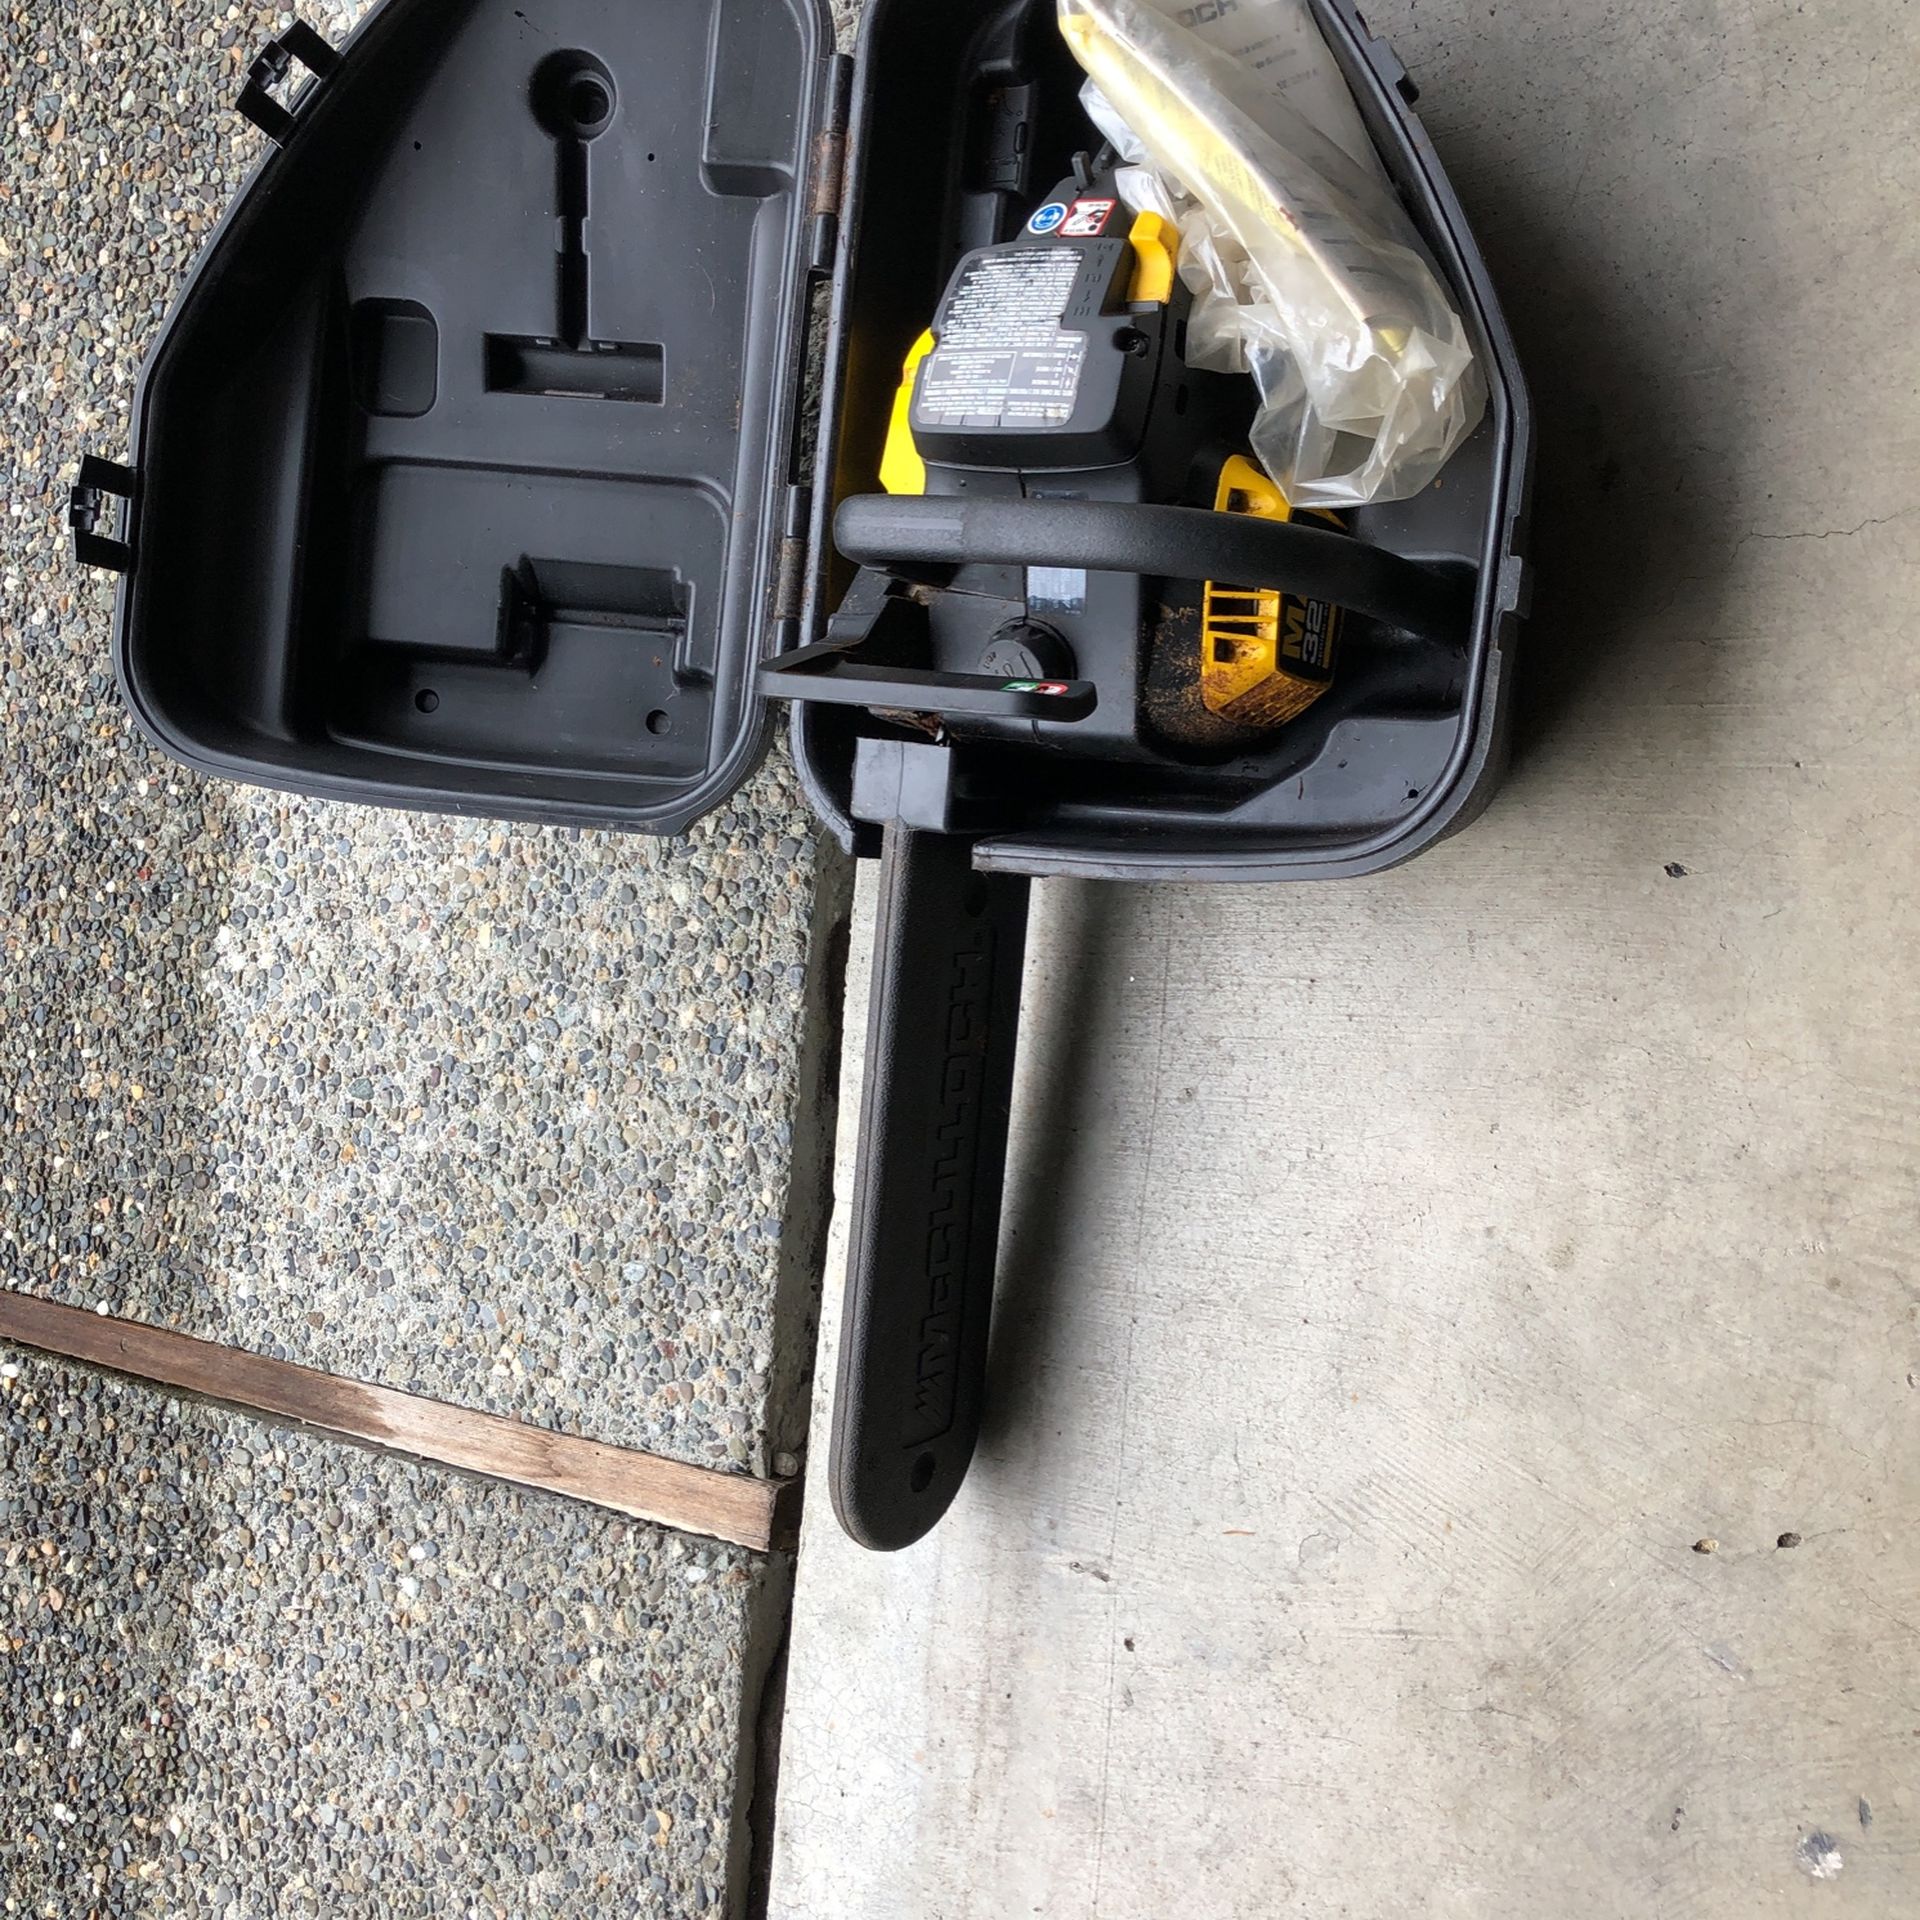 Free McCulloch Chainsaw With Plastic Case